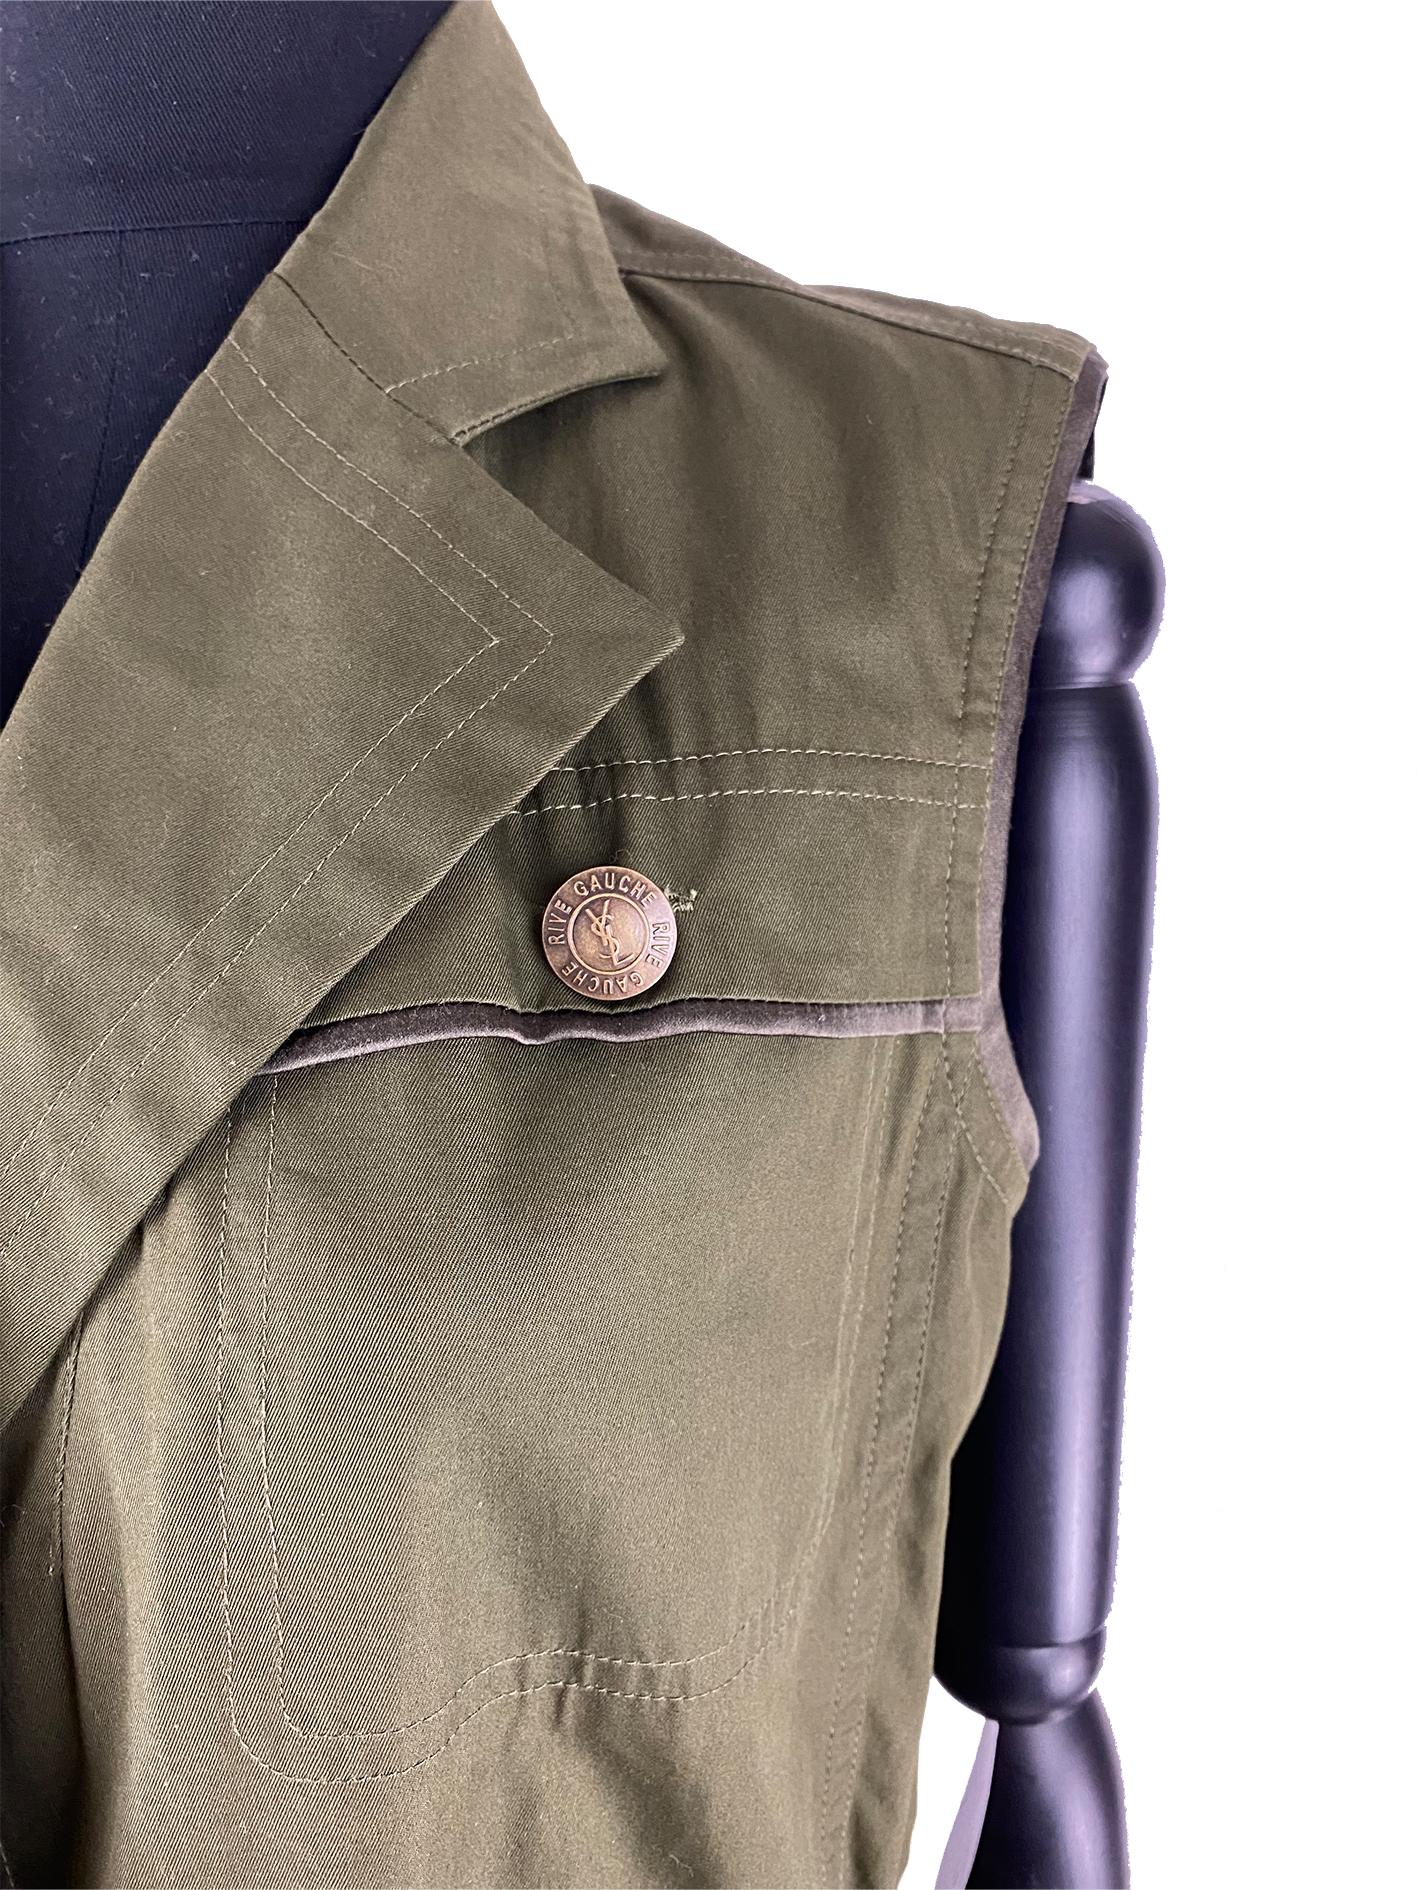 A Yves Saint Laurent tailored vest from the Tom Ford era in an army green dating back to the mid-2000s. This vest is fitted to the body by pulling the corded drawstring at the waist for a sculpted silhouette. The satin panel at the hem in the same